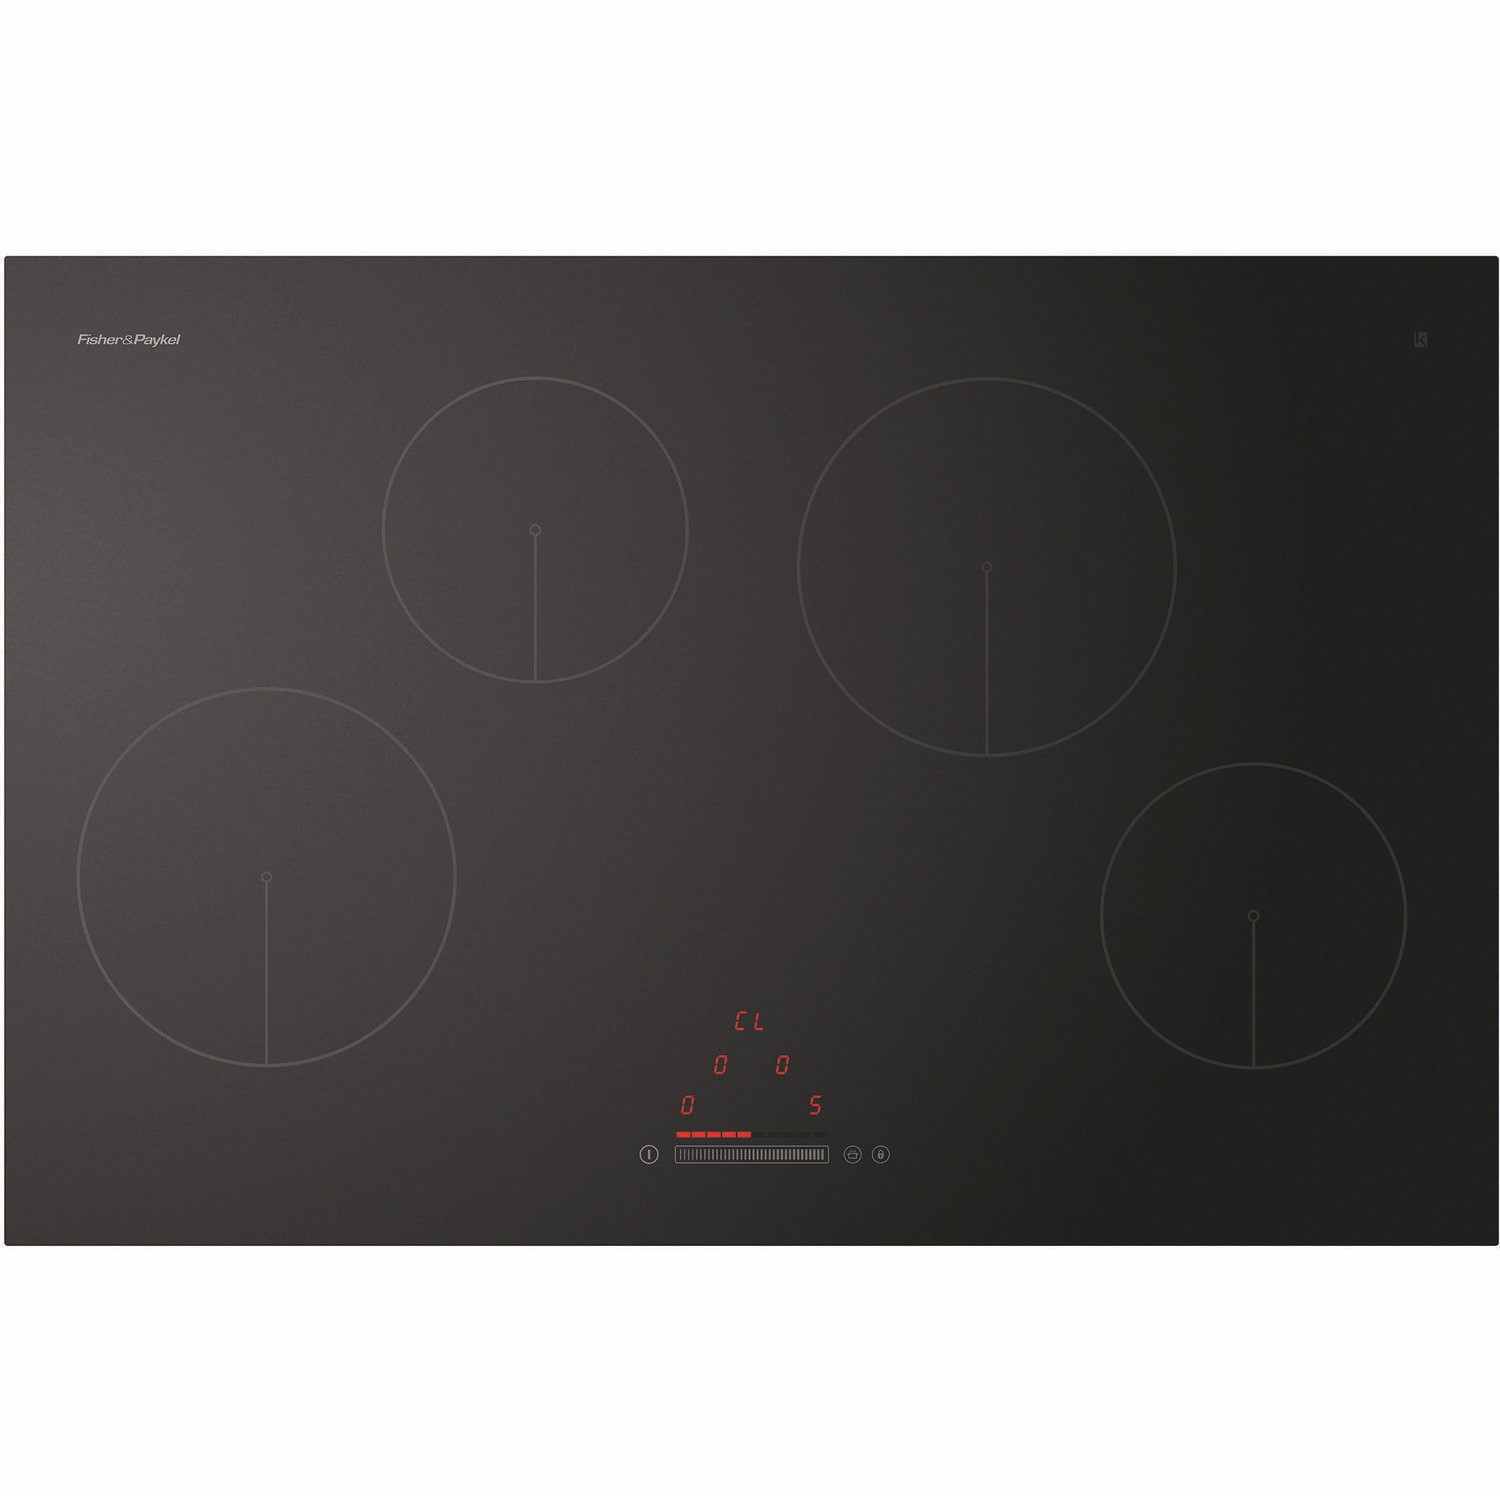 Fisher & Paykel Series 7 80cm Four Zone Induction Hob - Black